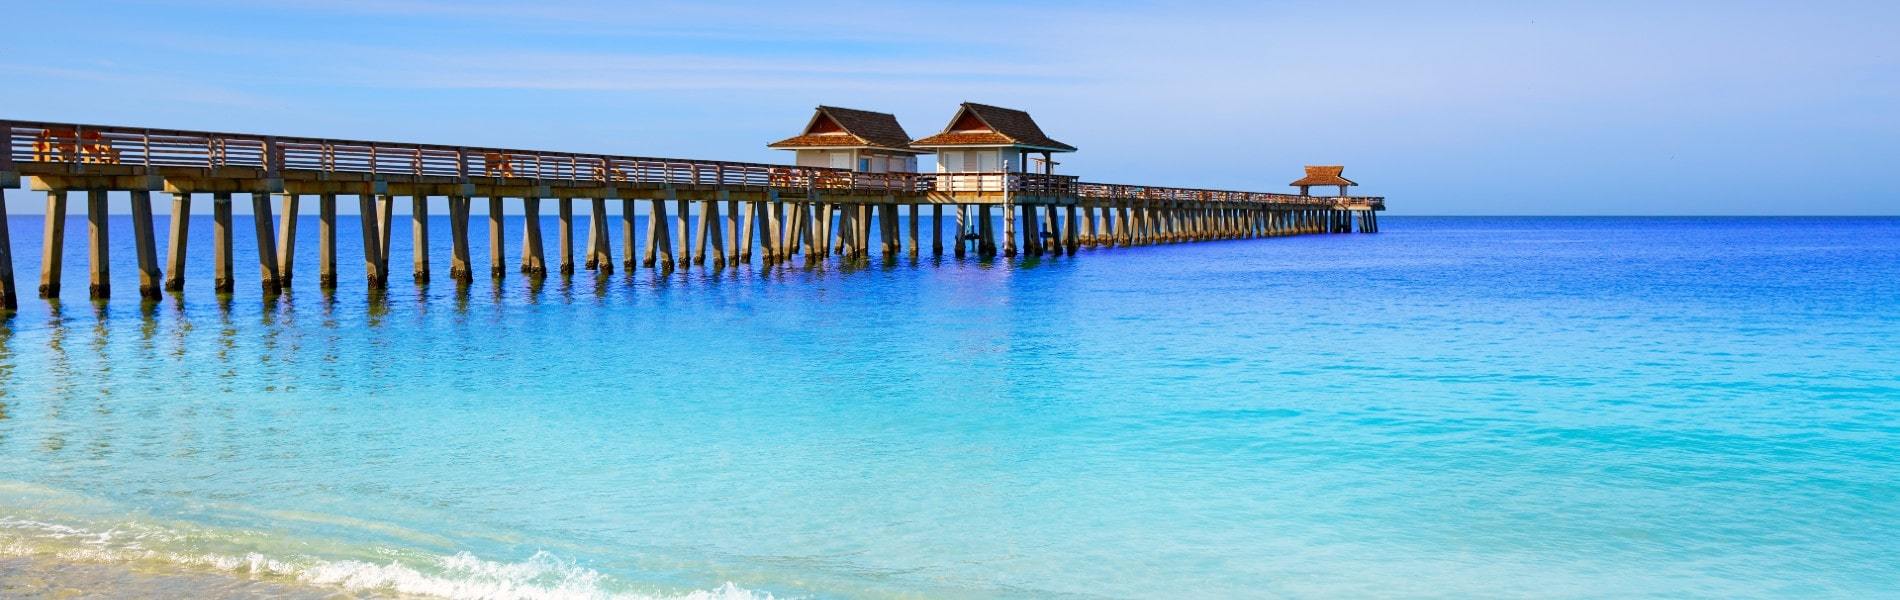 naples pier and beach in florida